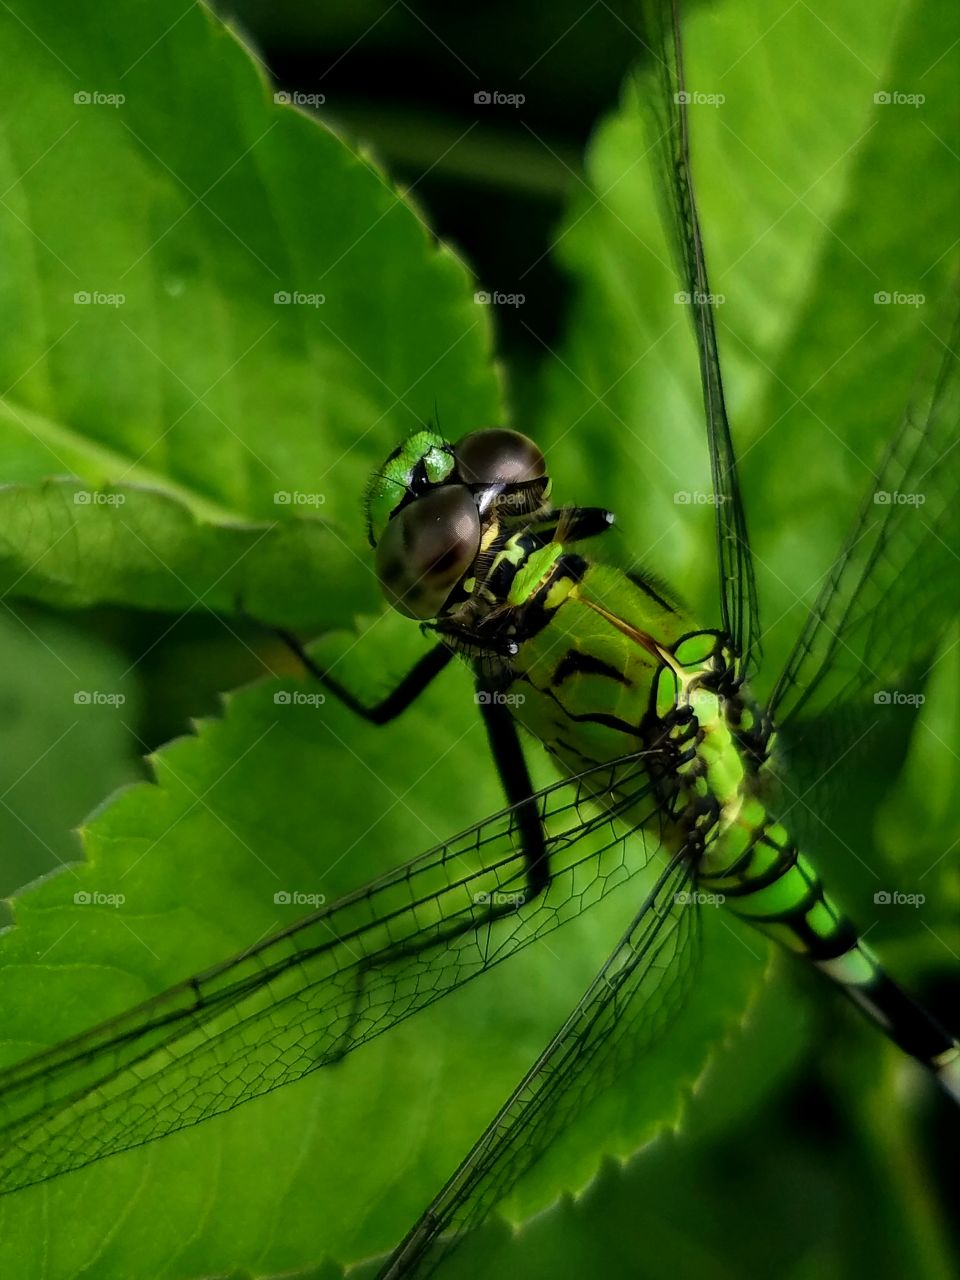 Insect, Dragonfly, Nature, Leaf, Wildlife